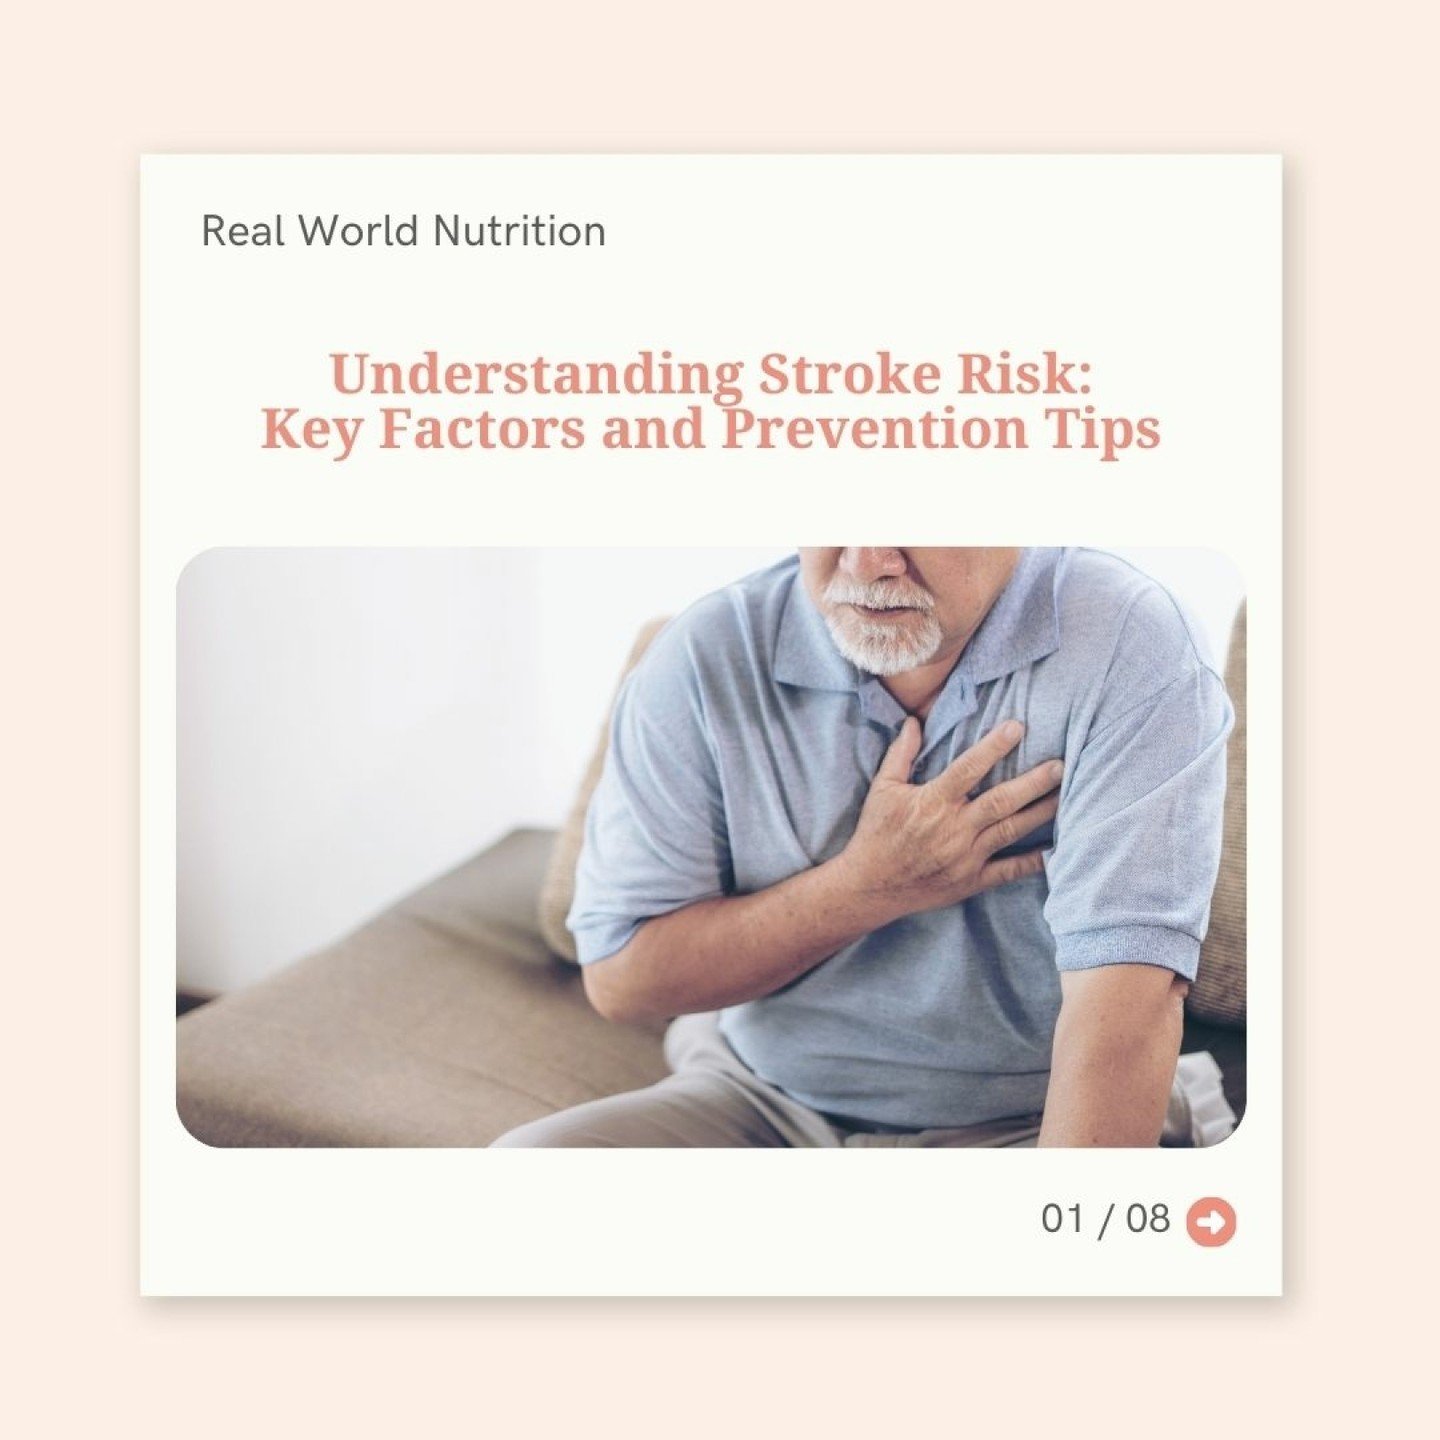 A stroke can happen to anyone, but certain factors can increase your risk. Here are some key risk factors and lifestyle modifications to help prevent strokes:

🛑High Blood Pressure: This is the leading cause of stroke. Regular monitoring and managem